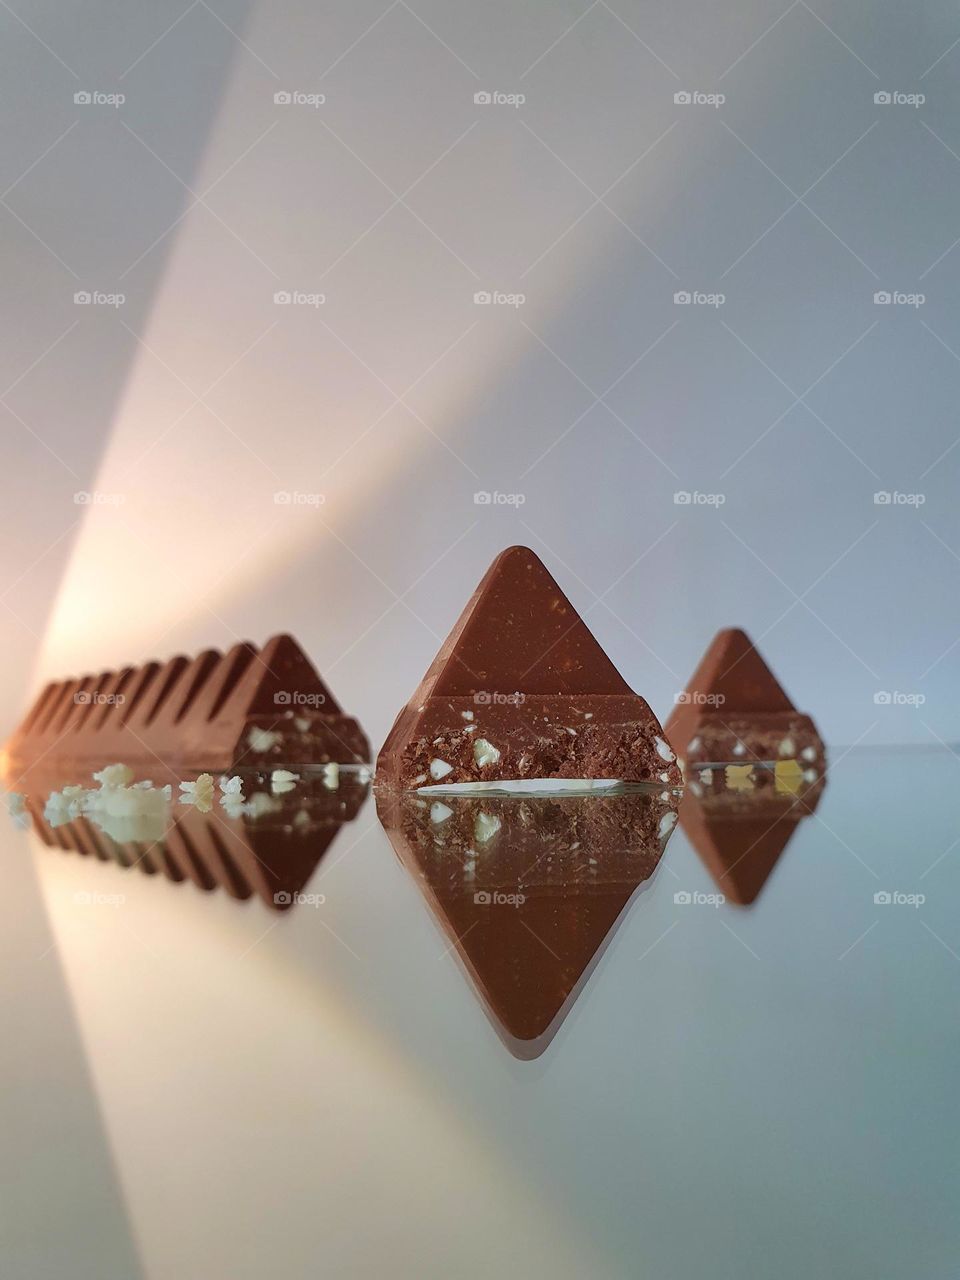 triangle  - Toblerone - triangle chocolate with almonds- see double